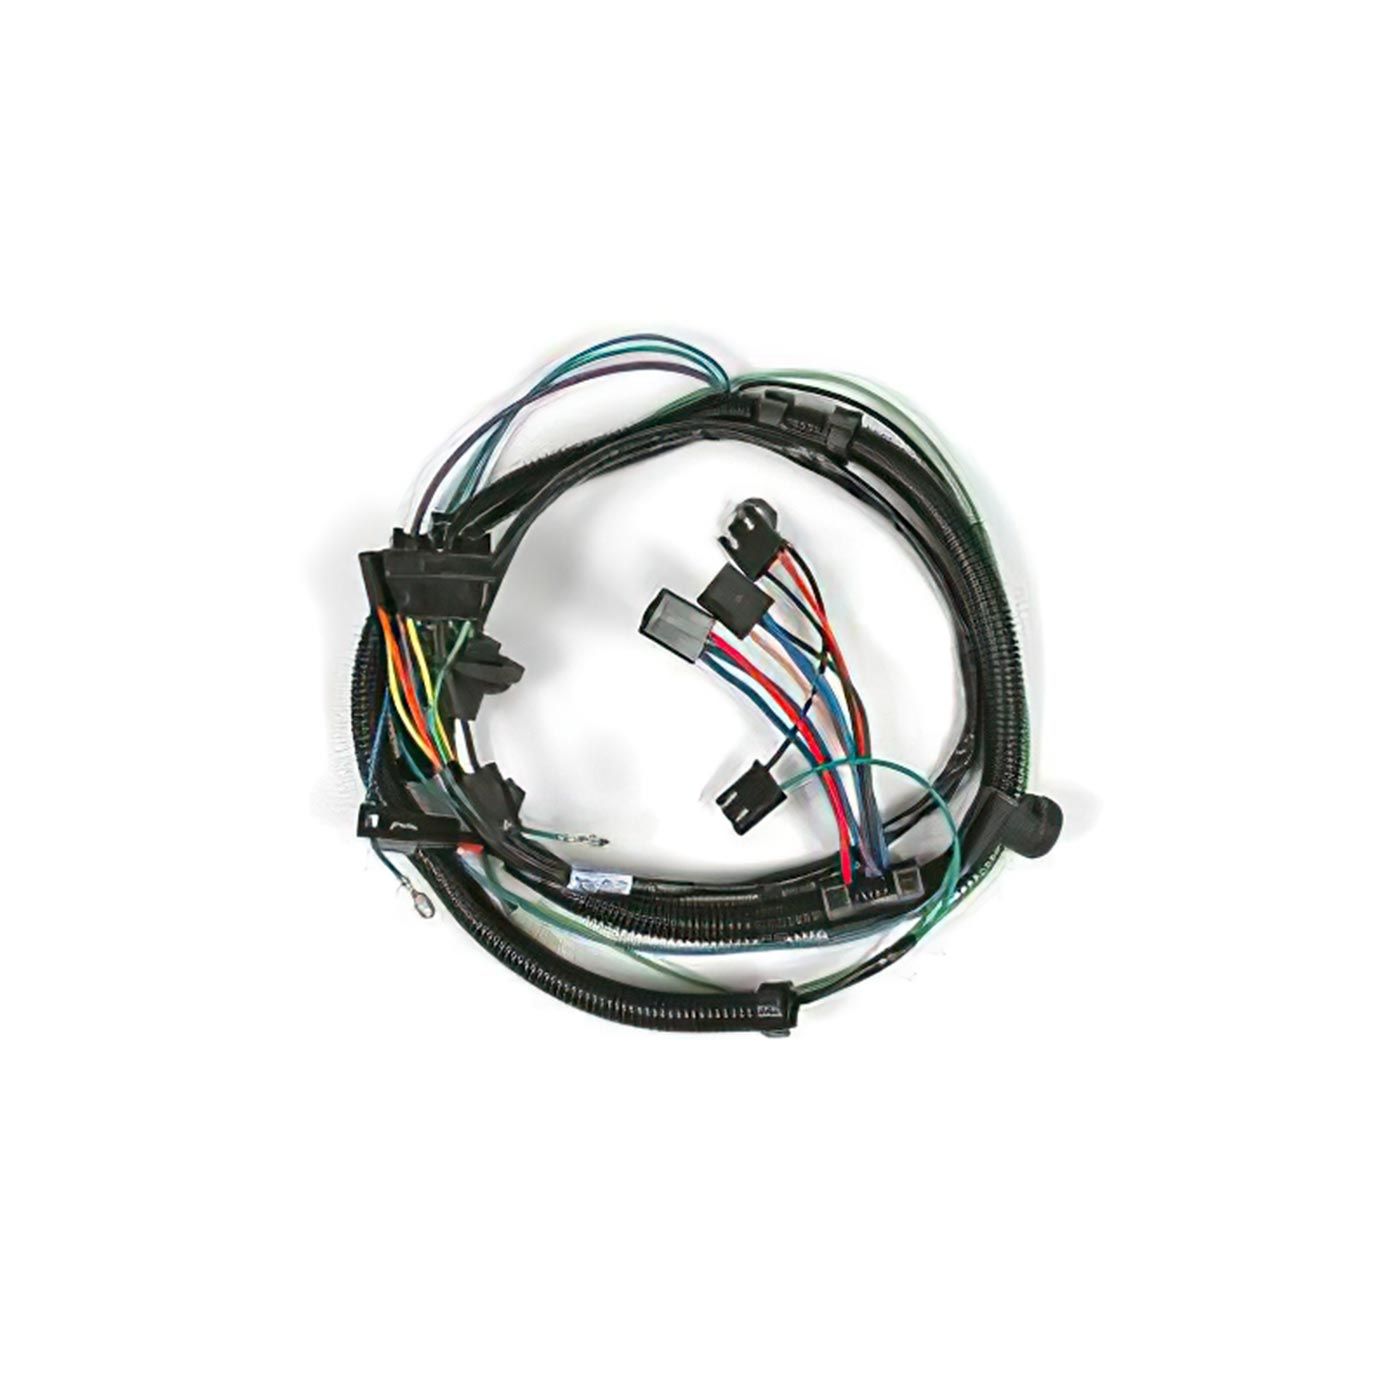 1979 Corvette AC Harness without Auxilliary Cooling Fan - Includes Heater Wiring (L-82)